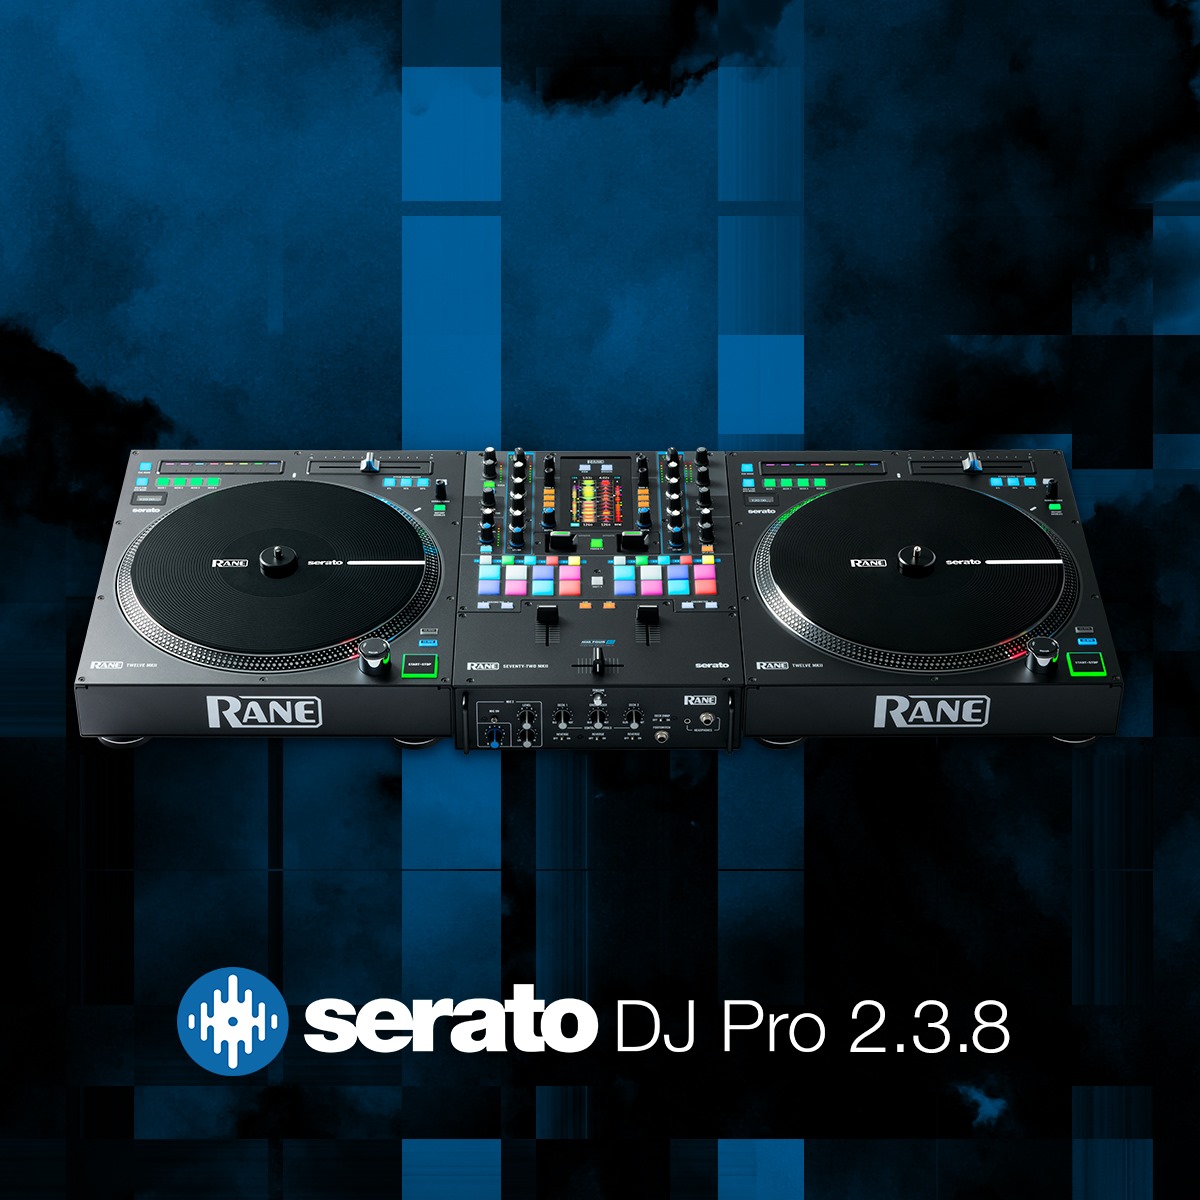 Serato The Dj Pro Update Brings Support For